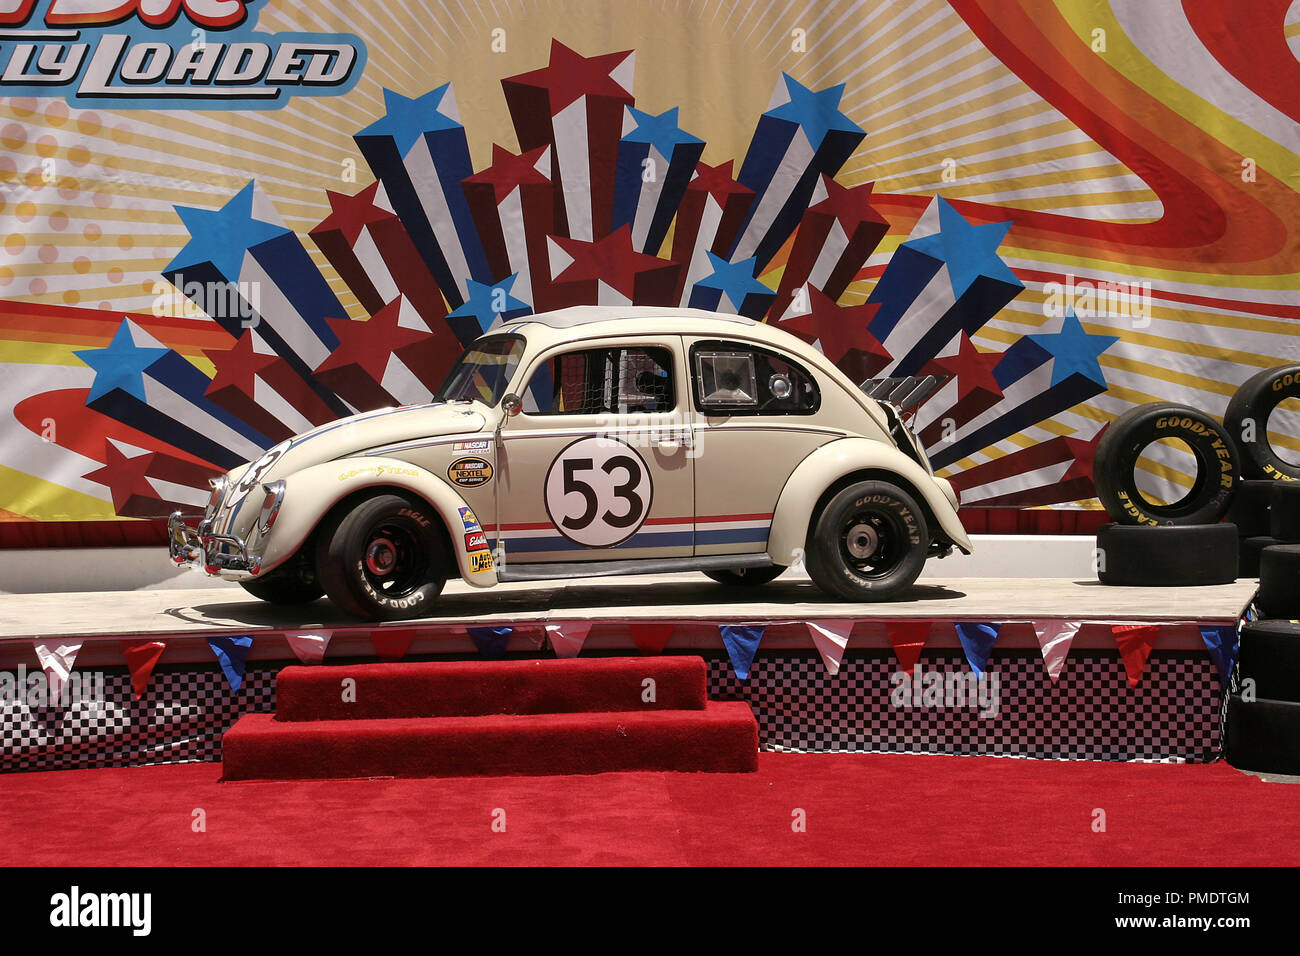 Herbie: Fully Loaded" (Premiere) Herbie 06-19-2005 / El Capitan /  Hollywood, CA Photo by Joseph Martinez / PictureLux File Reference # 22401  0141PLX For Editorial Use Only - All Rights Reserved Stock Photo - Alamy